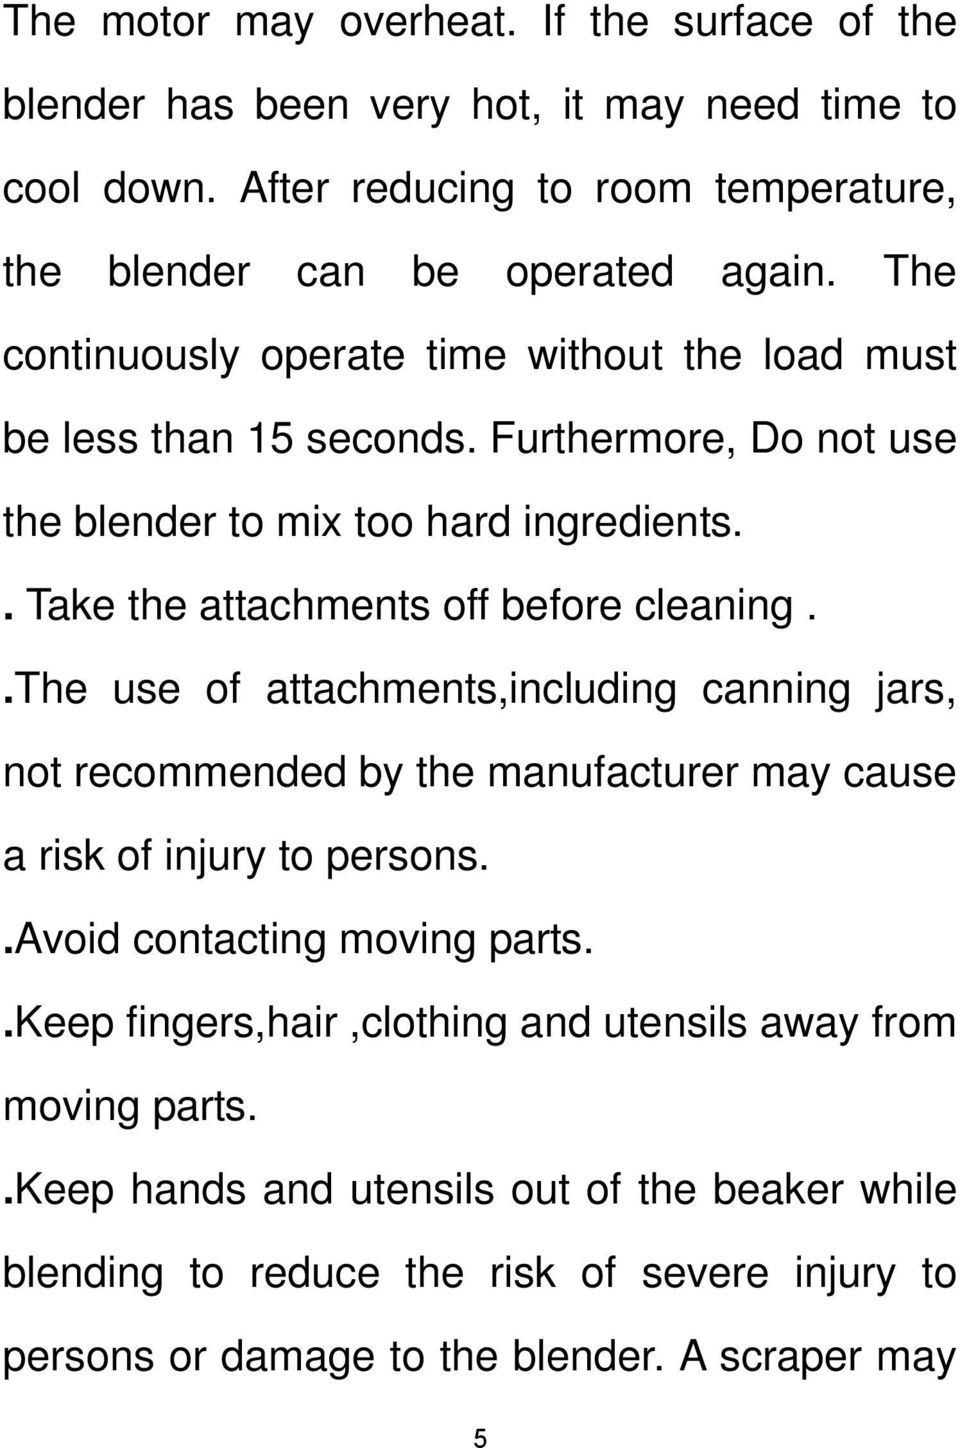 . Take the attachments off before cleaning..the use of attachments,including canning jars, not recommended by the manufacturer may cause a risk of injury to persons.